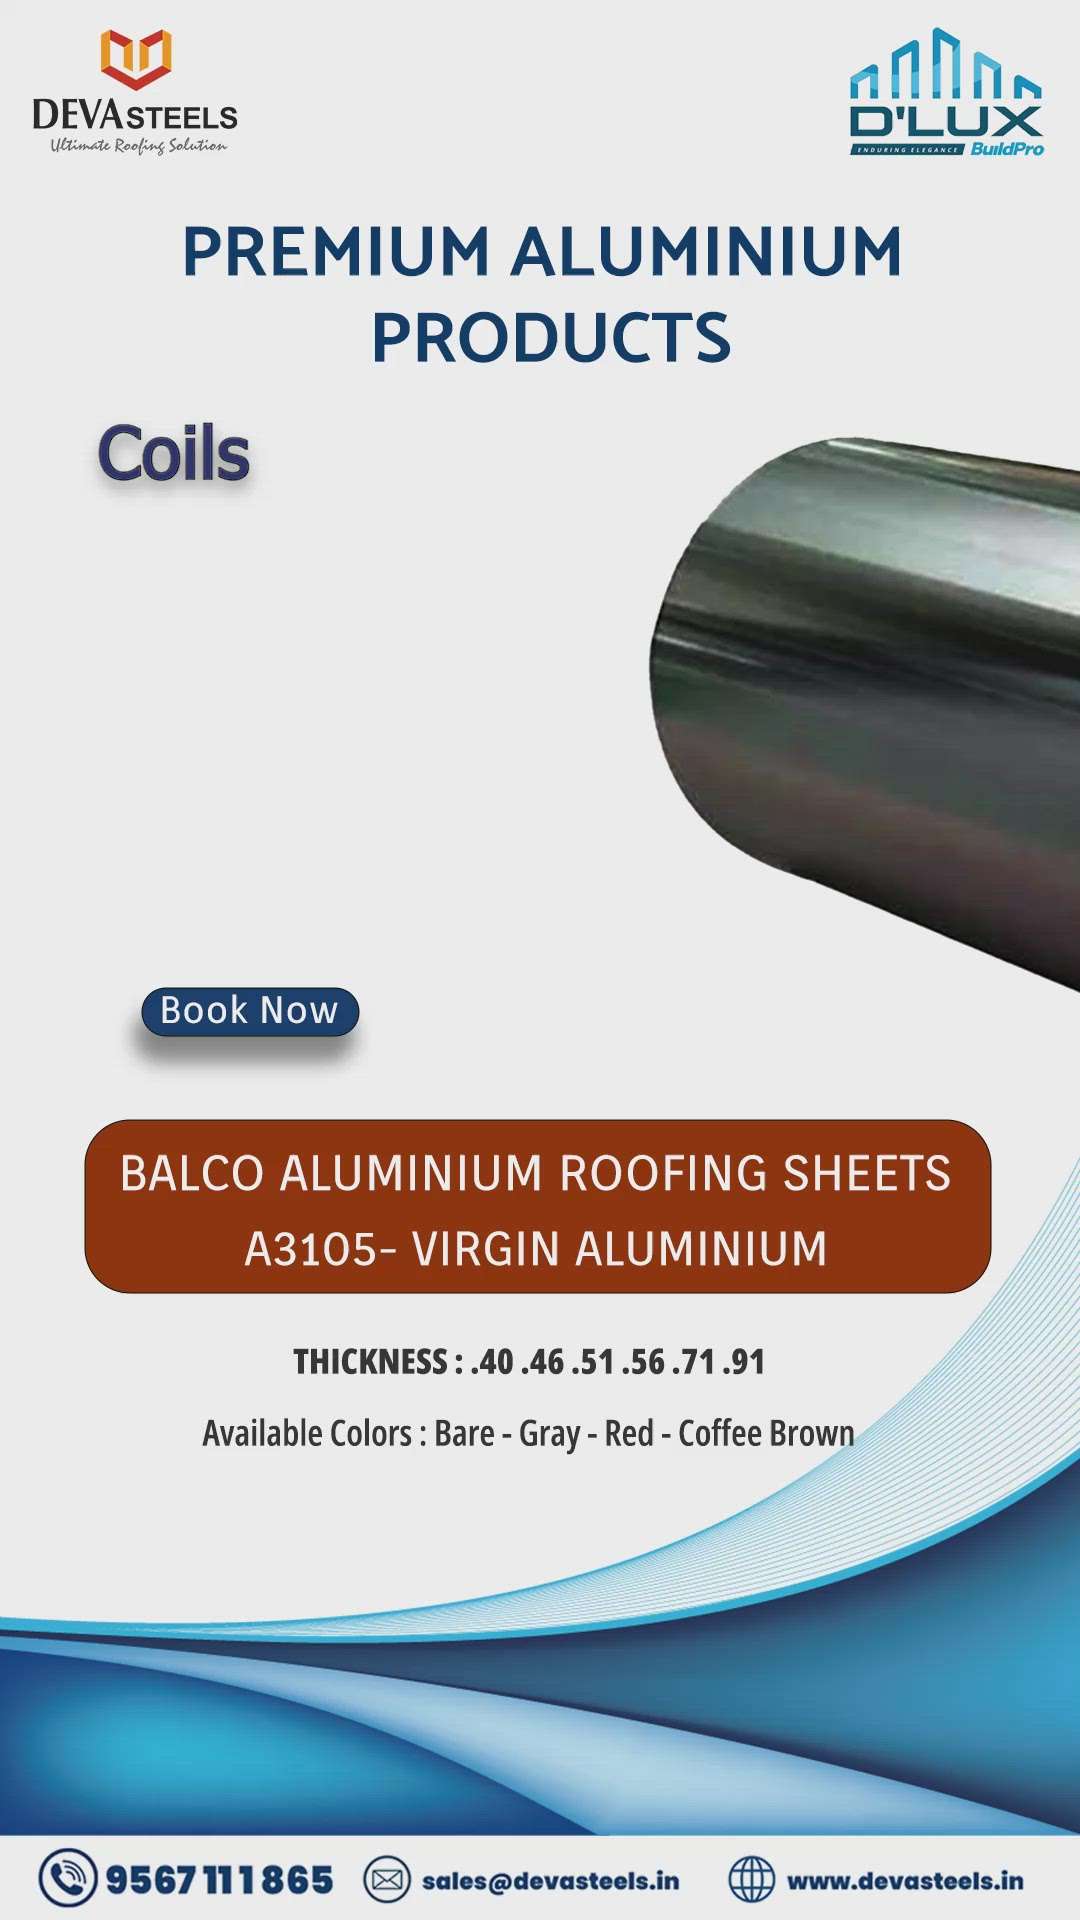 High quality ALUMINIUM products from deva steels..

✅ A3105 GRADE - high quality
✅. 40 mm to. 91 mm
✅ Light weight
✅ Variety of product range

#aluminiumroofing #Aluminiumcompositepanel #aluminiumcladding #aluminiumcoils
#aluminiumtilesheets

#BALCO #JINDAL